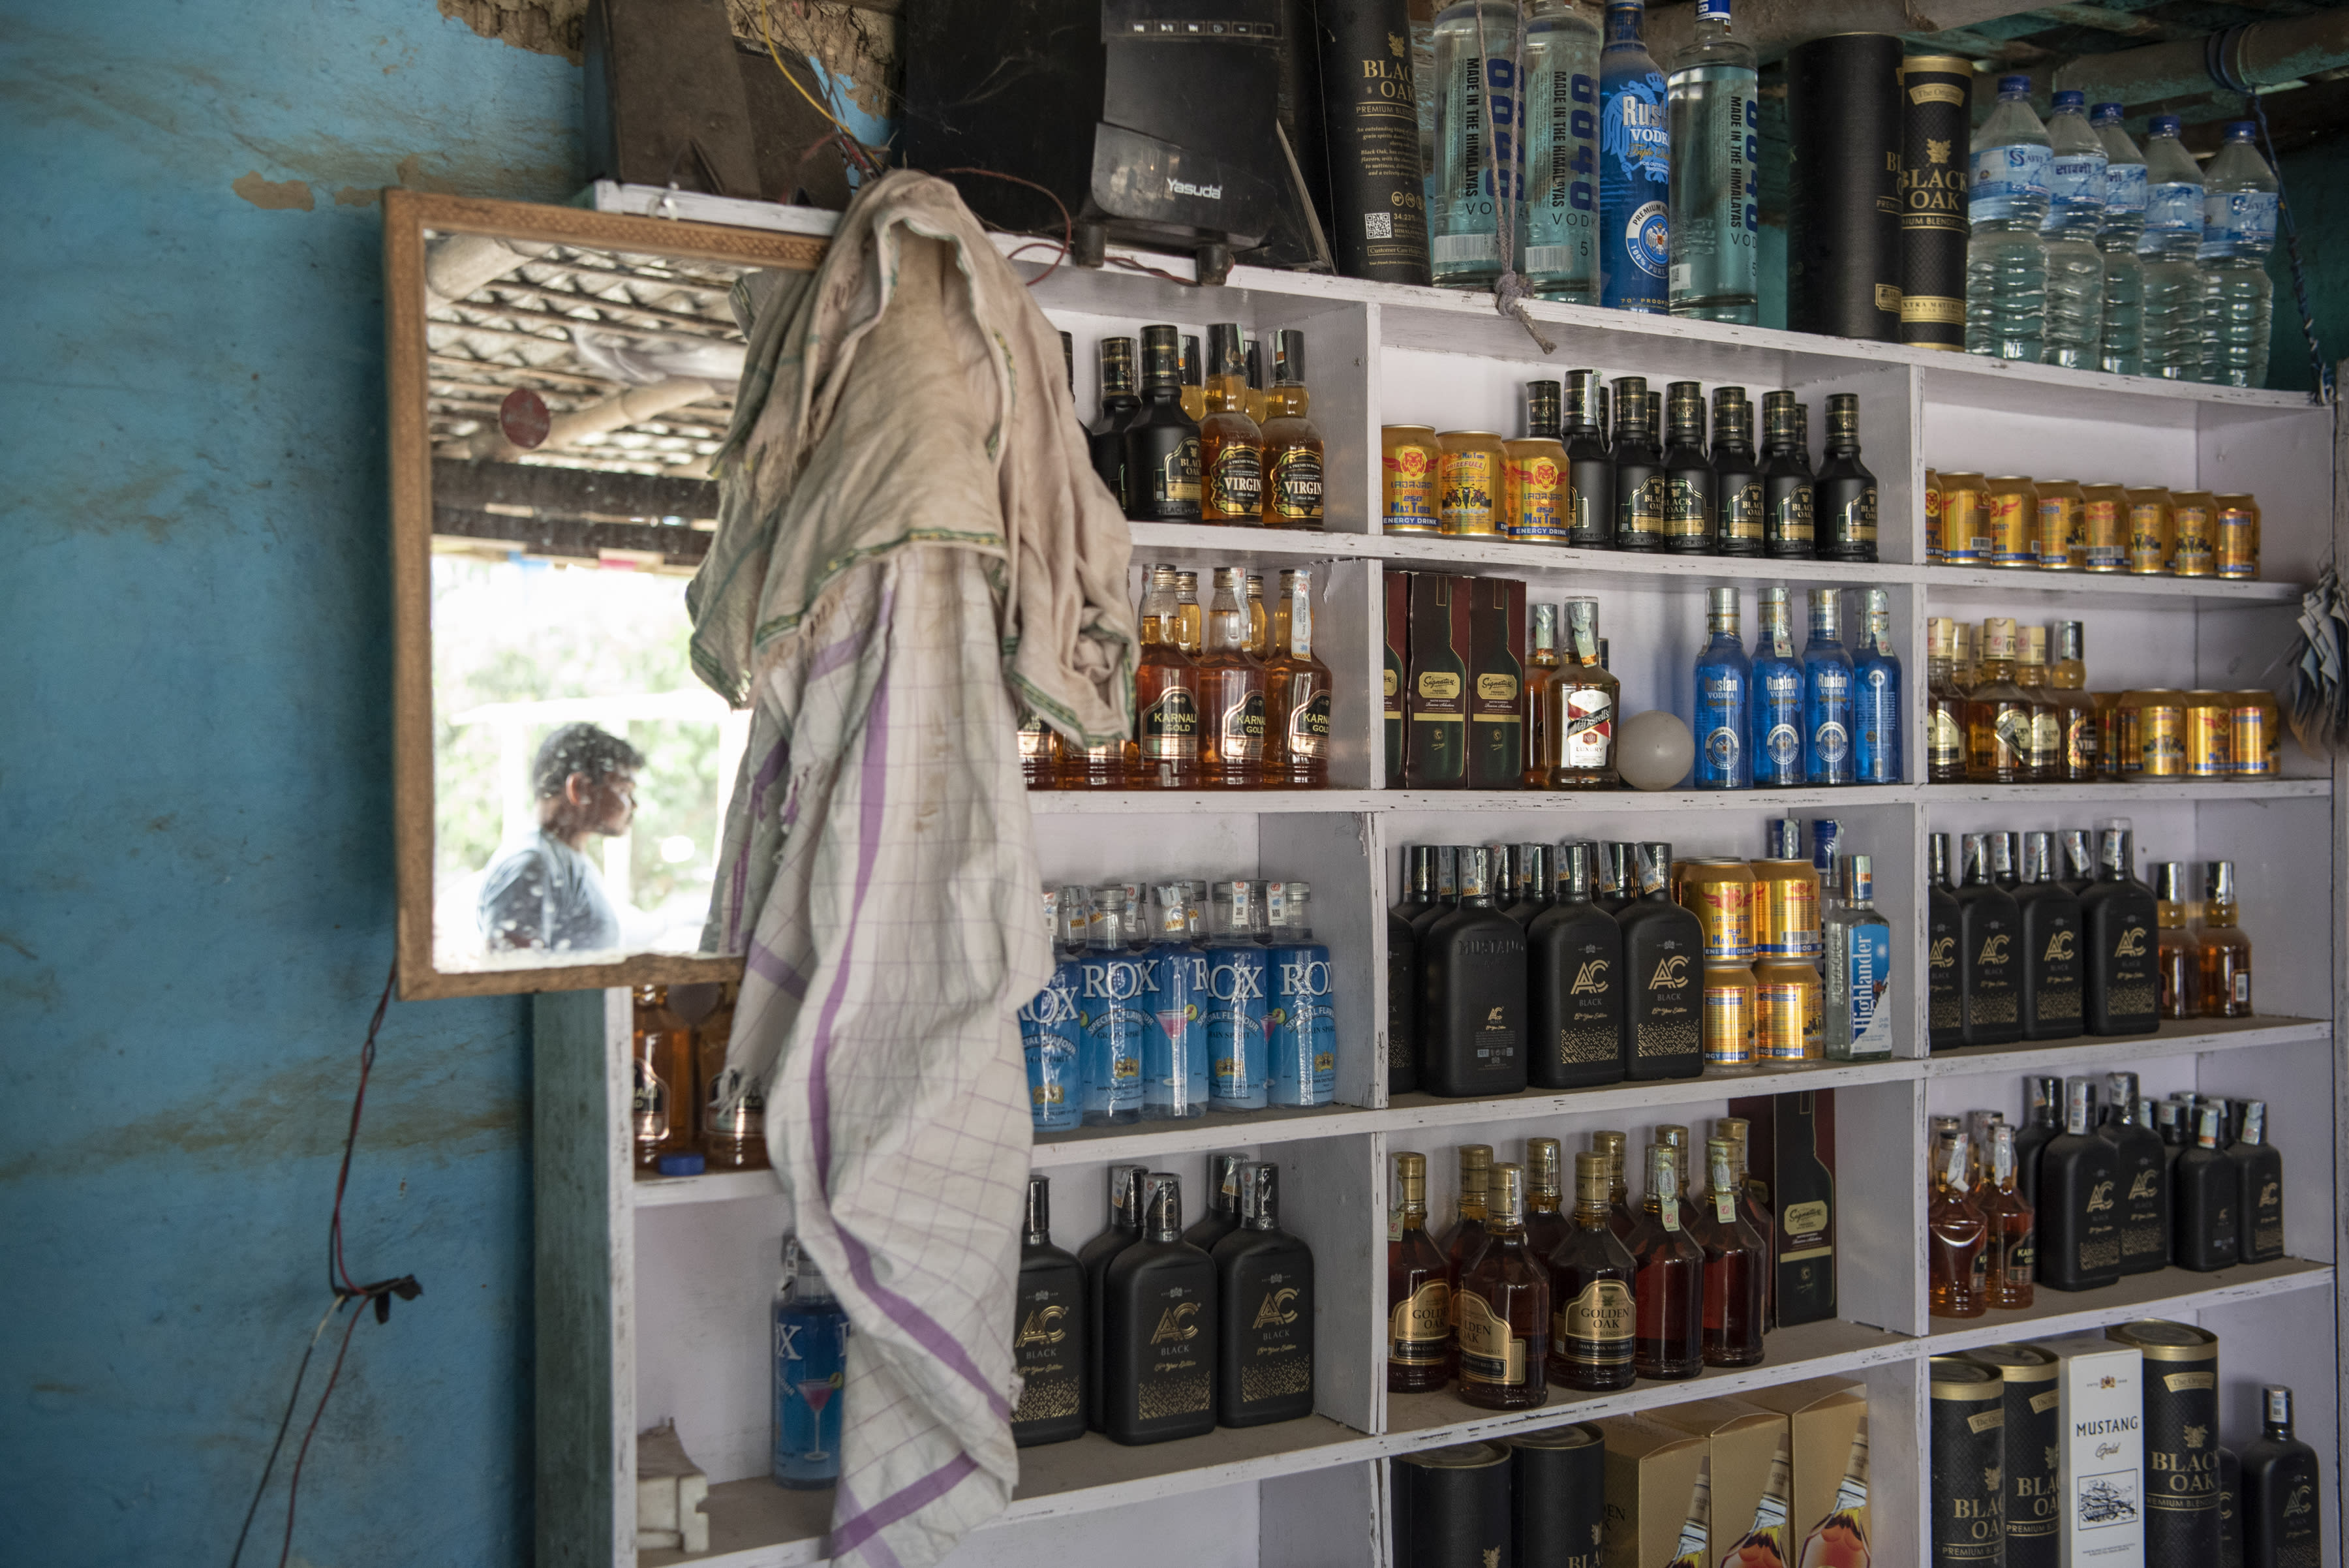 A shop selling bottles of Nepali alcohol, with labels that often copy designs from well-known international brands, near Maruwai, Nepal on April 15, 2022. Since the Indian state of Bihar banned alcohol in 2016, a small industry of bars and restaurants has sprung up just across the border in Nepal, catering to Indians of all classes seeking to quench their thirst. 